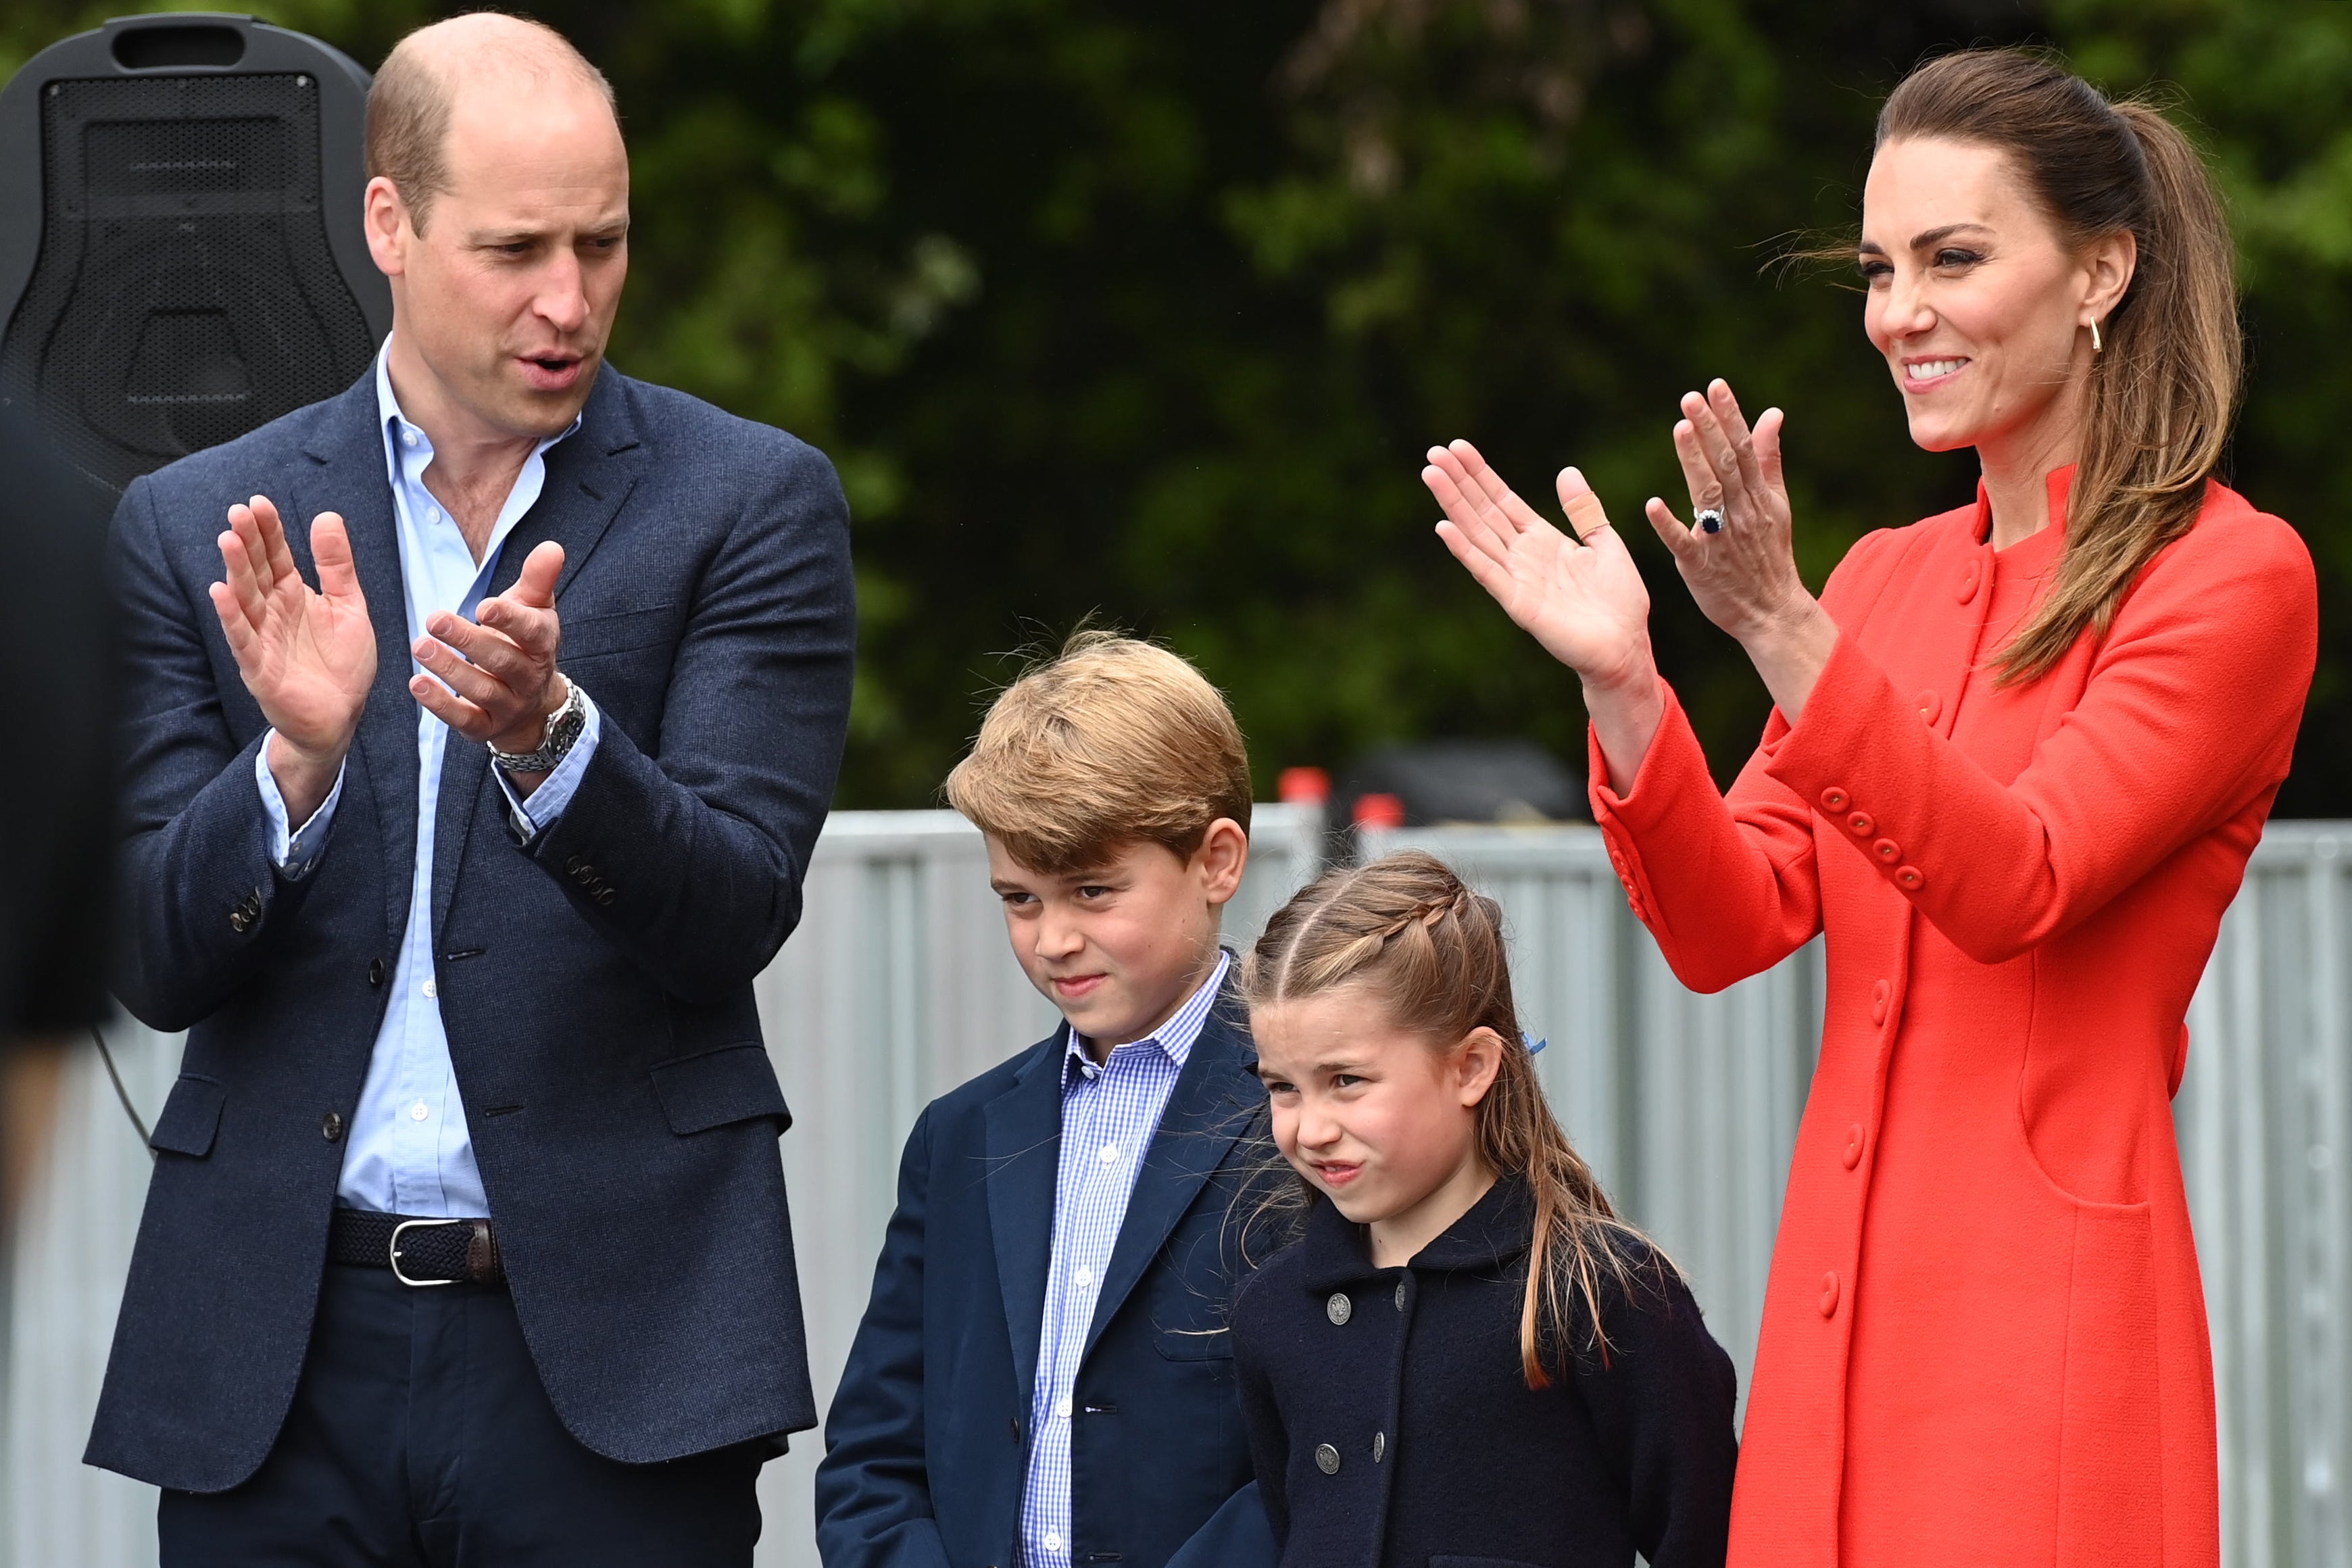 The Duke and Duchess of Cambridge, Prince George and Princess Charlotte applaud a rehearsal during their visit to Cardiff Castle to meet performers and crew involved in the special Platinum Jubilee Celebration Concert taking place in the castle grounds later in the afternoon, as members of the Royal Family visit the nations of the UK to celebrate Queen Elizabeth II’s Platinum Jubilee. Picture date: Saturday June 4, 2022.